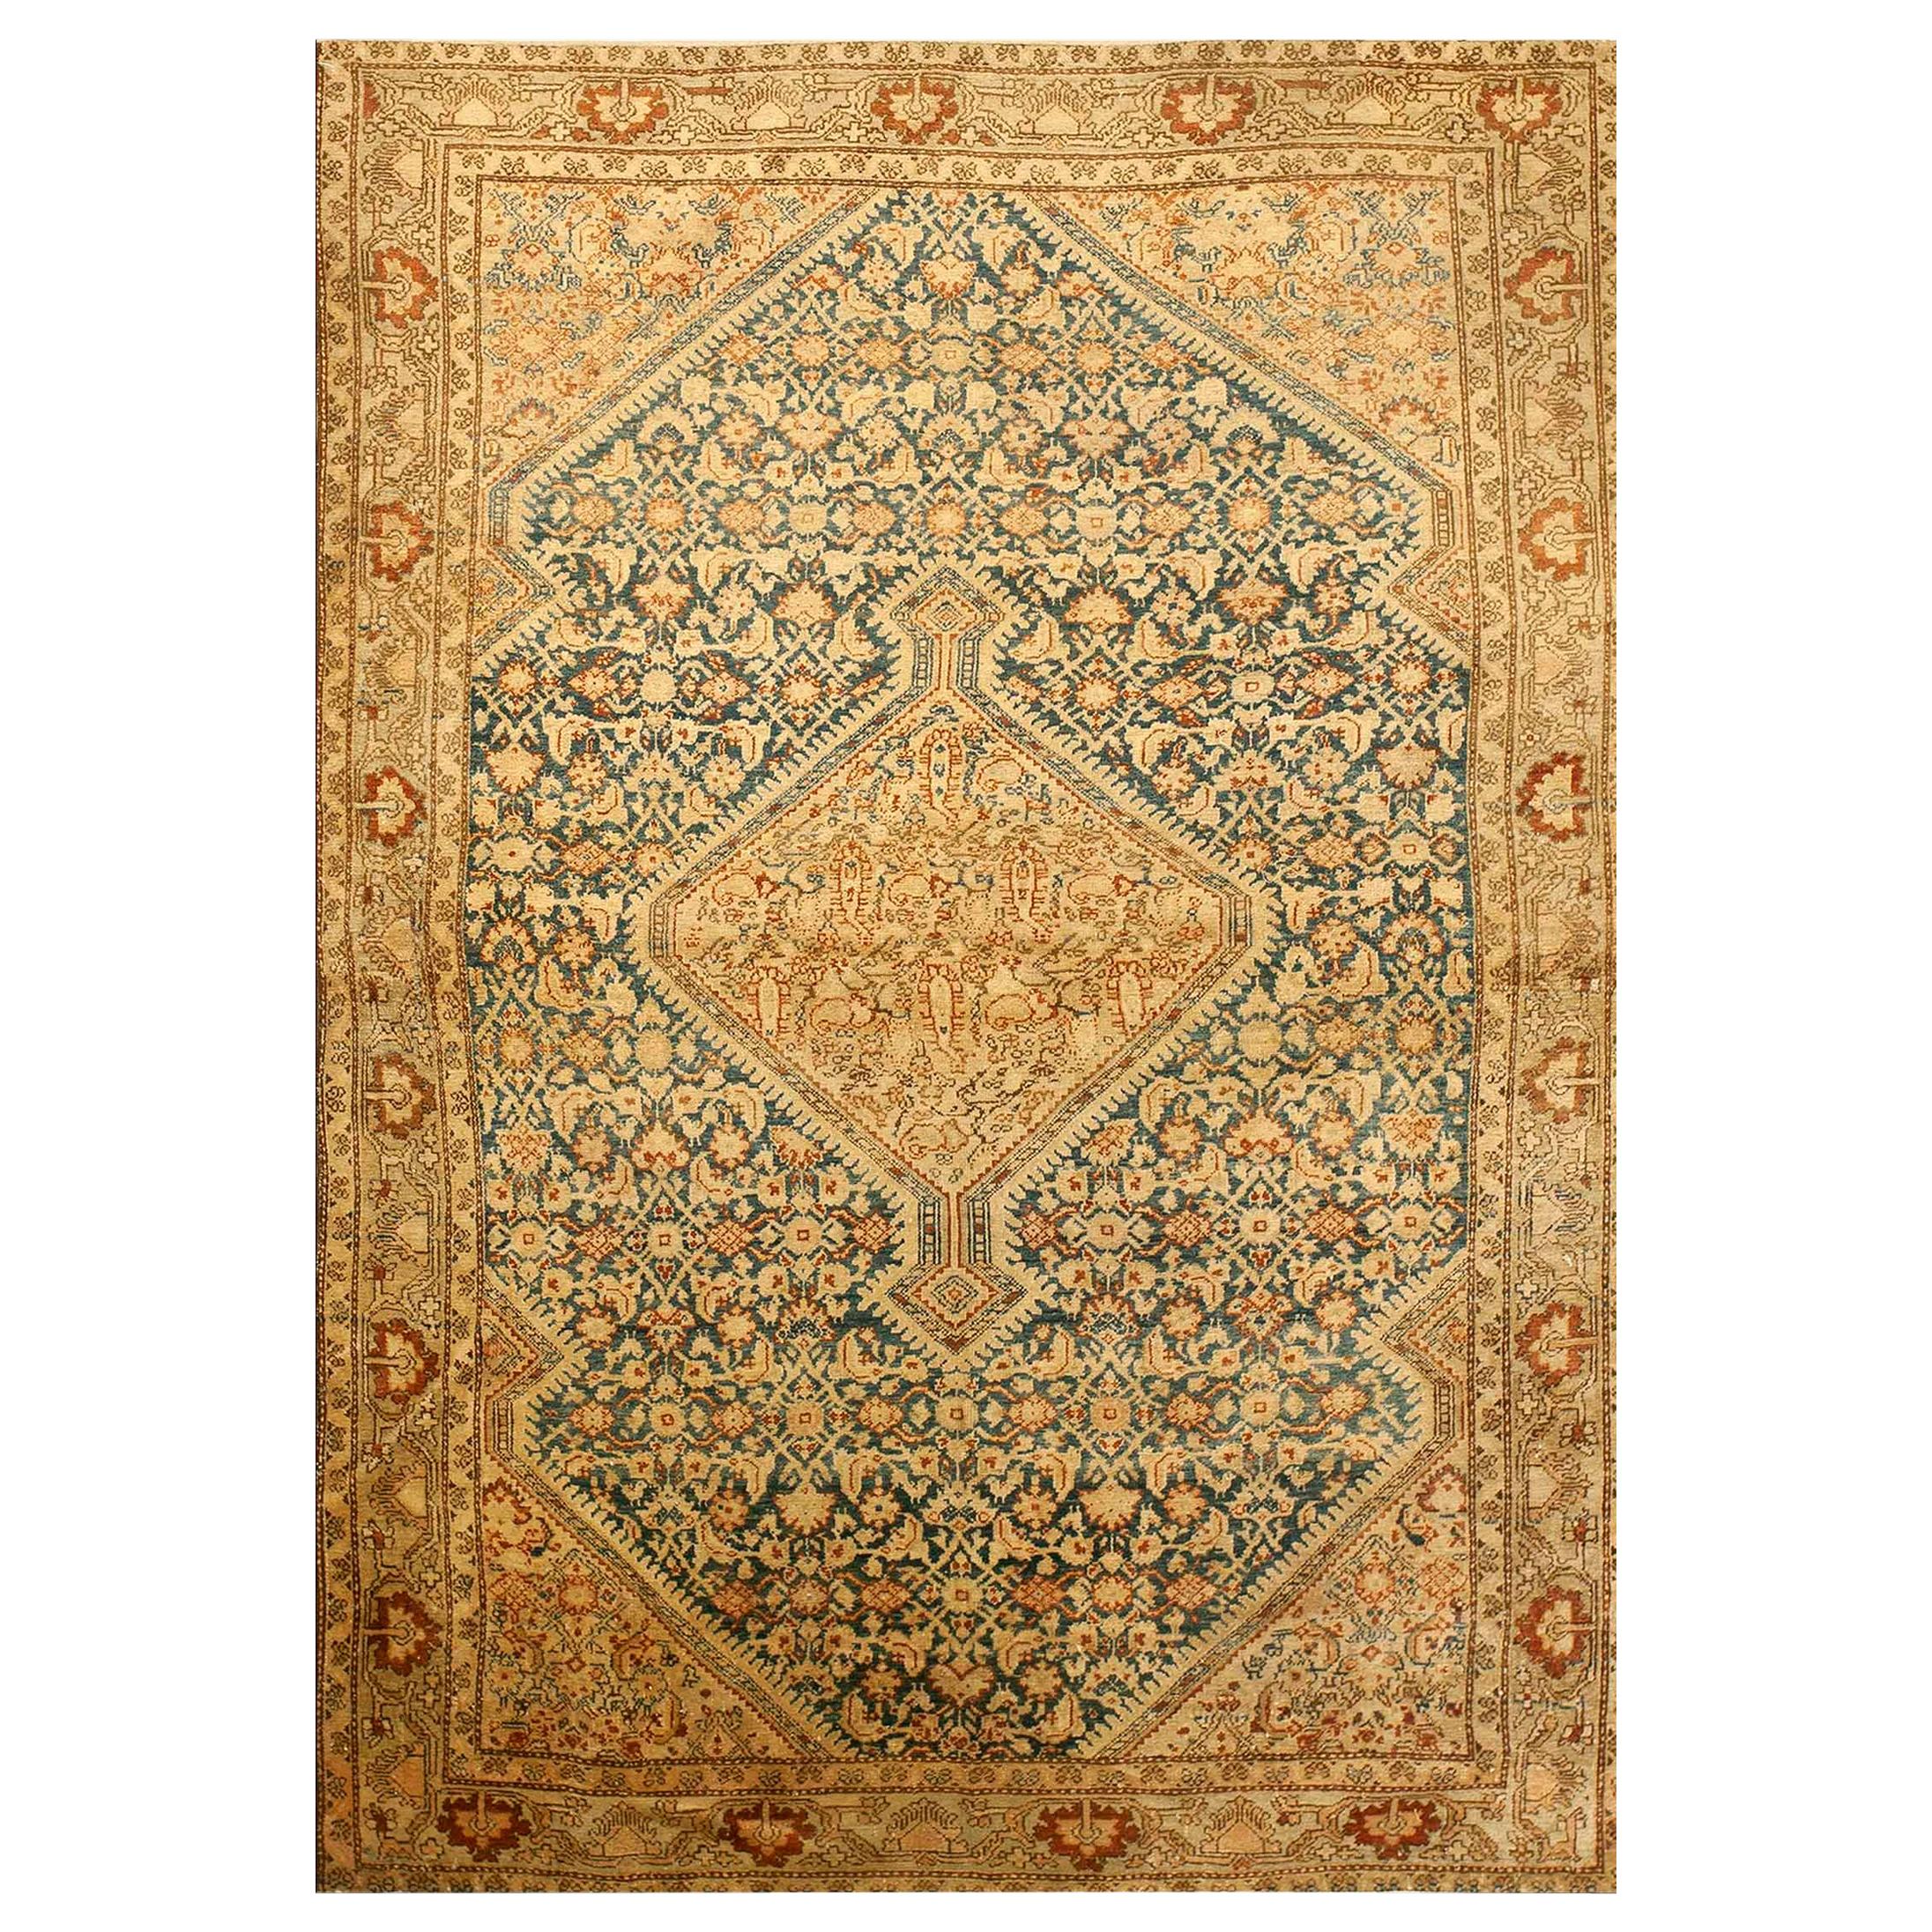 Early 20th Century Persian Malayer Rug ( 4'6" x 6'3" - 137 x 191 ) For Sale